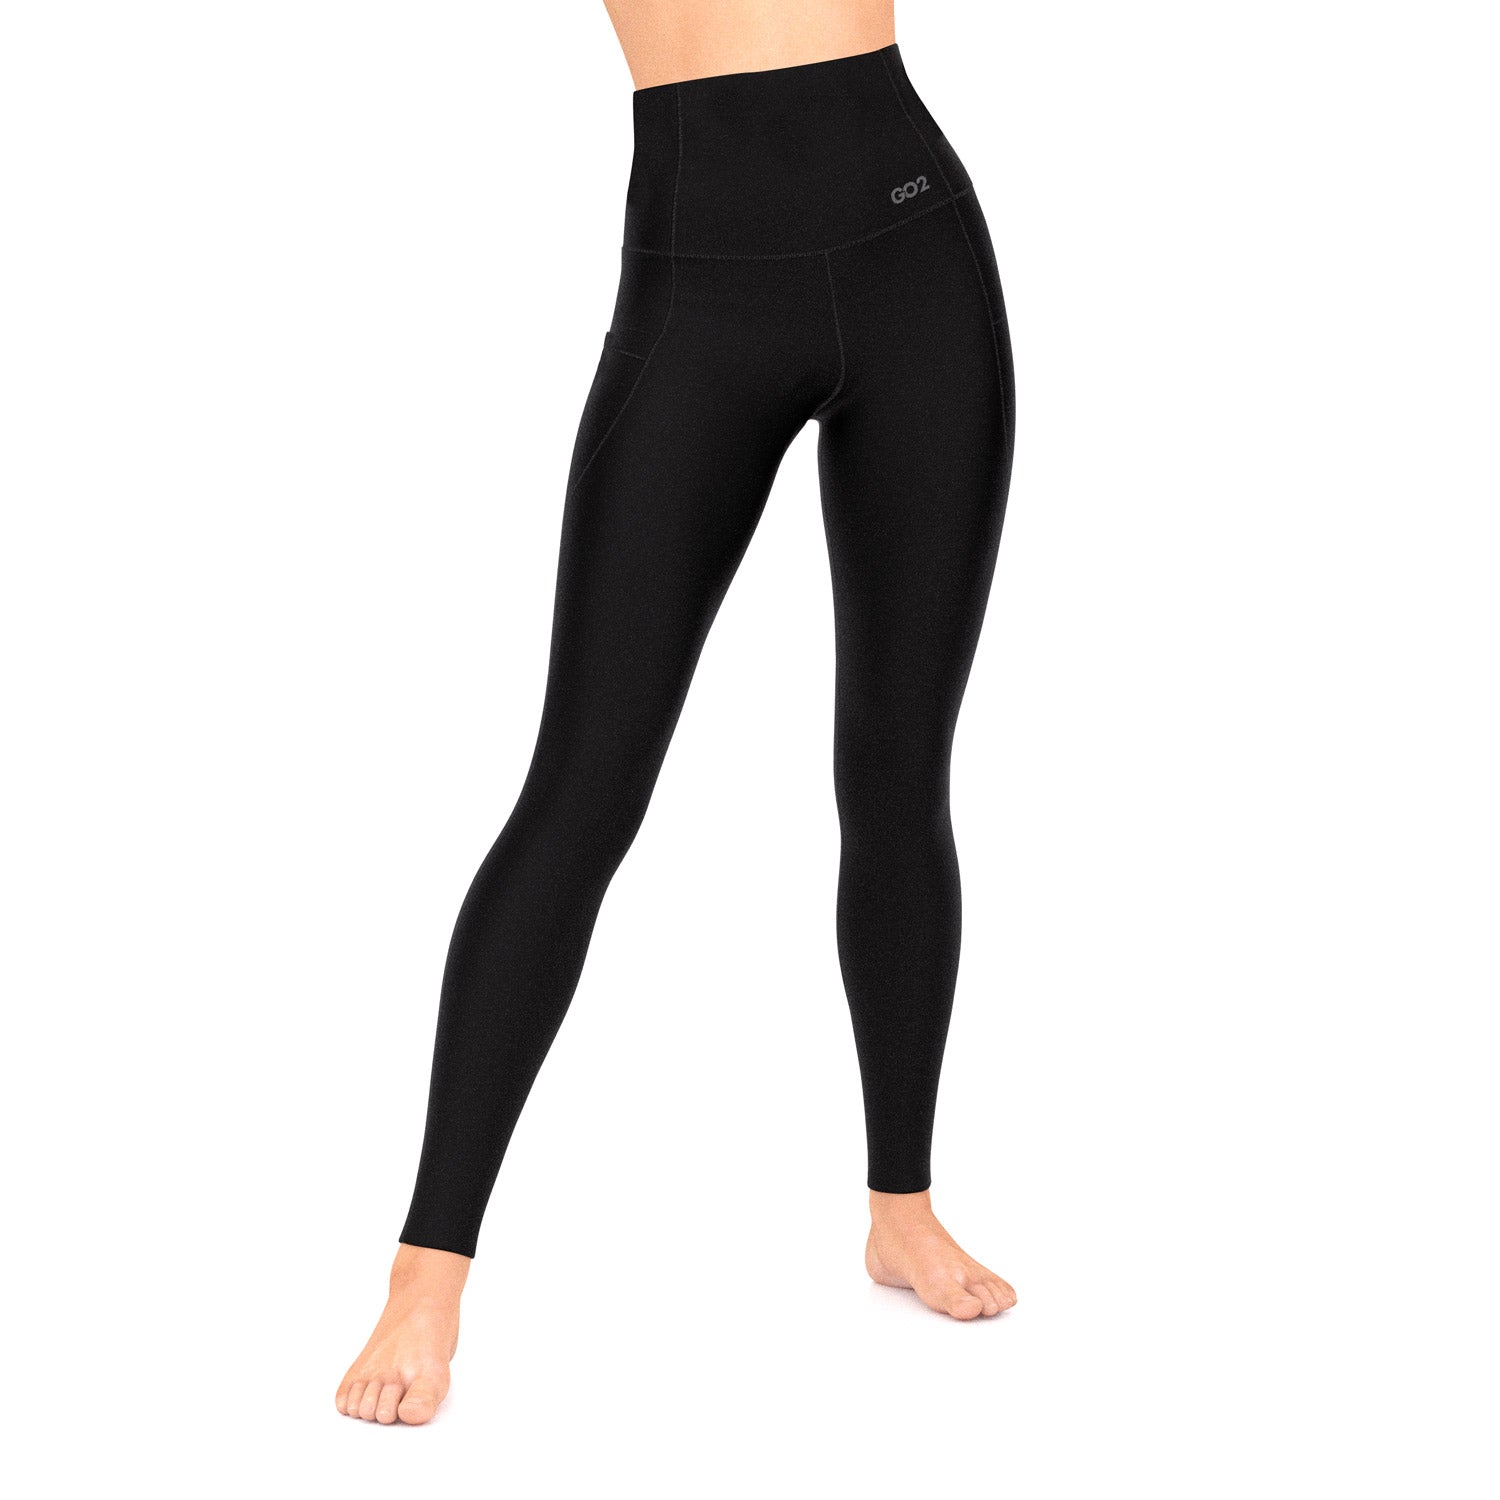 SKY BLUE HIGH WAISTED V-CUT TUMMY CONTROL LEGGINGS WITH TWO SIDE POC –  JOVIERFIT ATHLEISURE BRAND